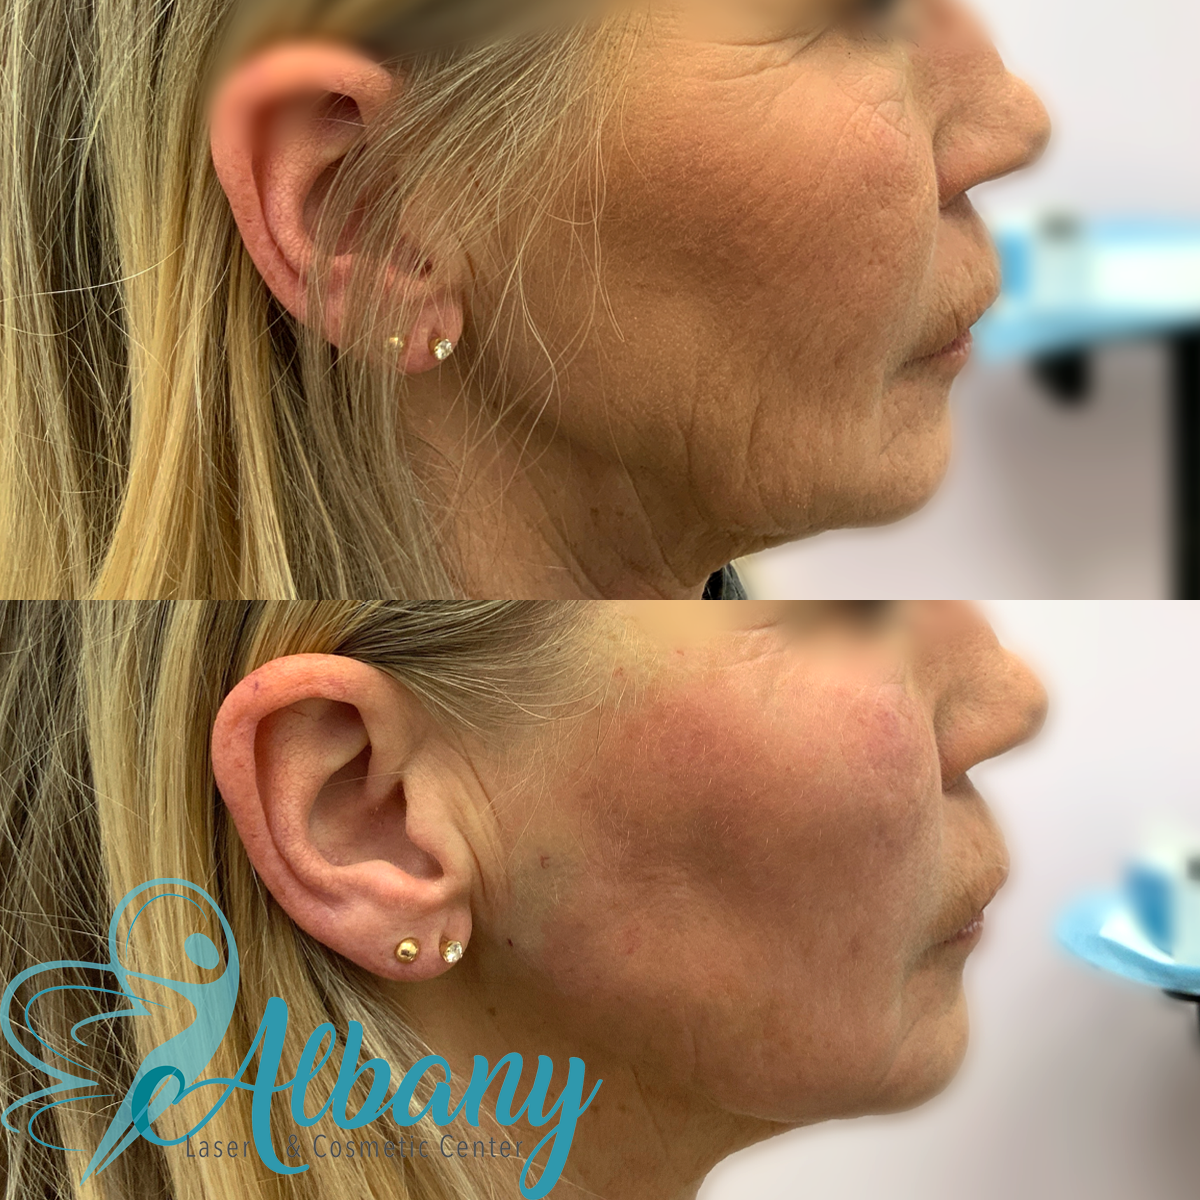 Before and after comparison of a woman's lower face, highlighting the effects of a cosmetic procedure performed at Albany Laser & Cosmetic Center. The before image shows visible wrinkles and sagging skin around the jawline and cheek. The after image shows a noticeable reduction in wrinkles and a firmer, more youthful appearance of the skin.